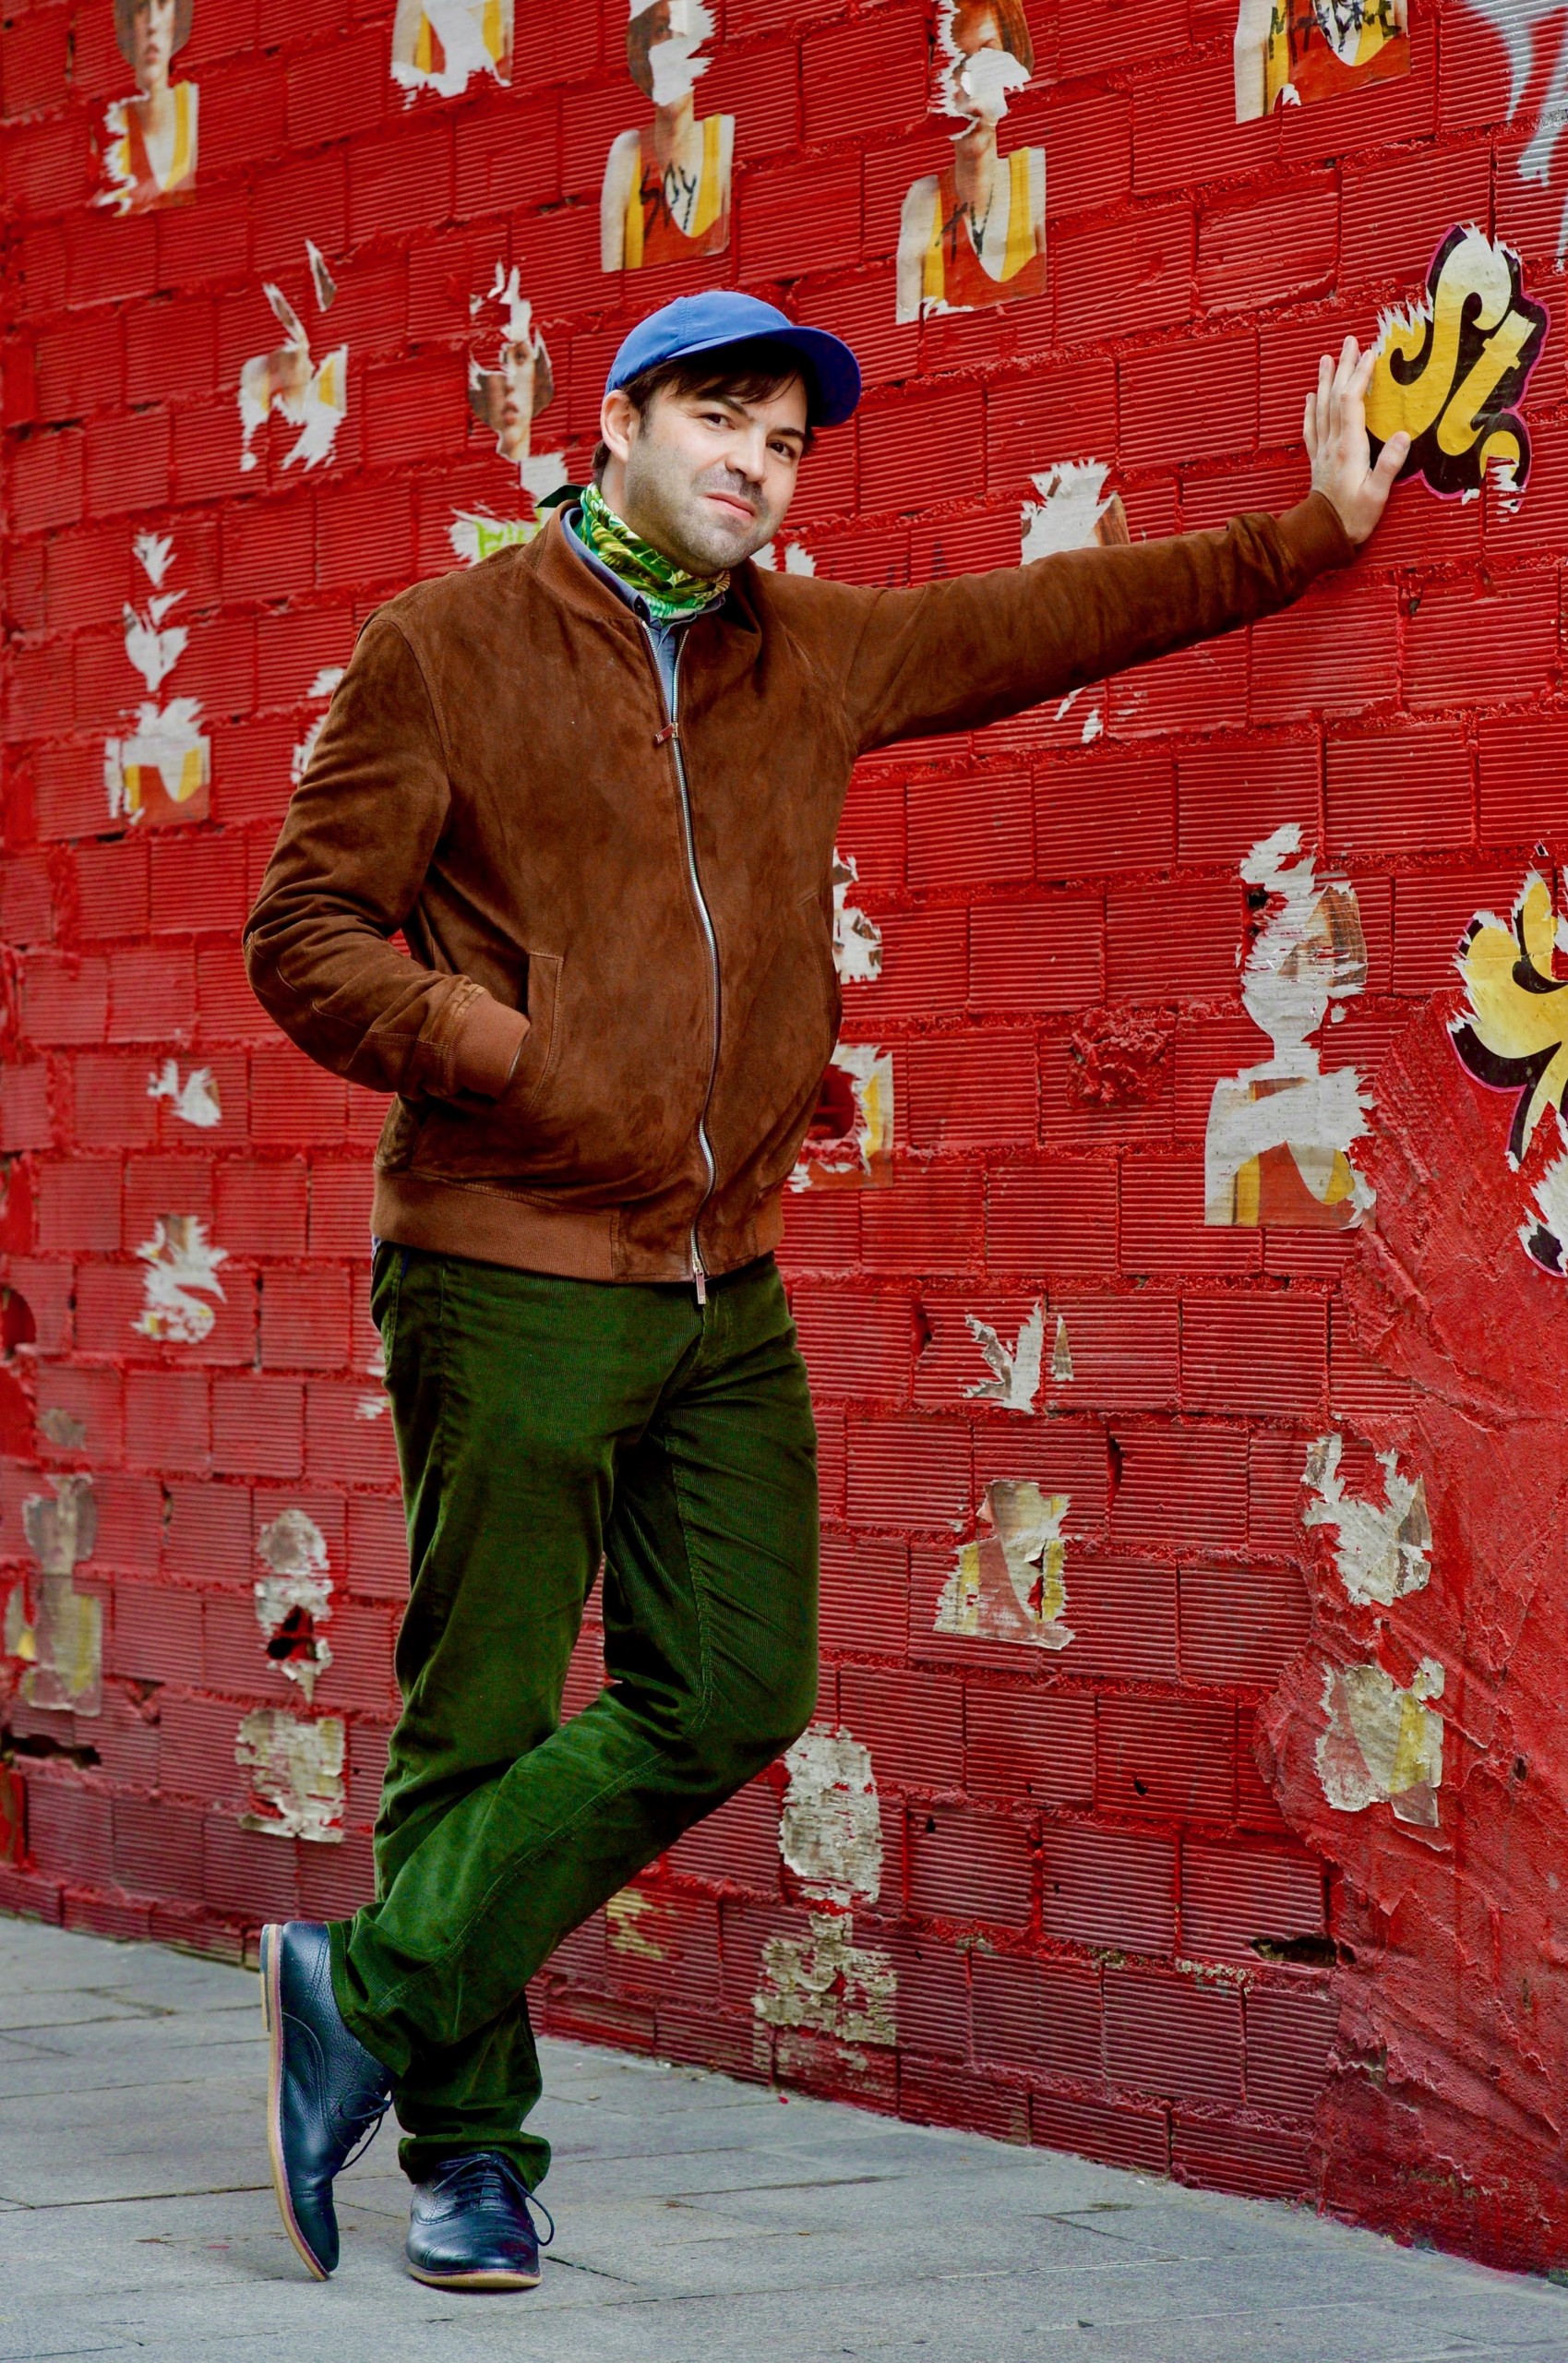 Portrait of Francisco Martínez. Francisco has short dark hair, green trousers, brown jacket, a colorful scarf and a blue cap on. Francisco is leaning with his left hand against a red wall.